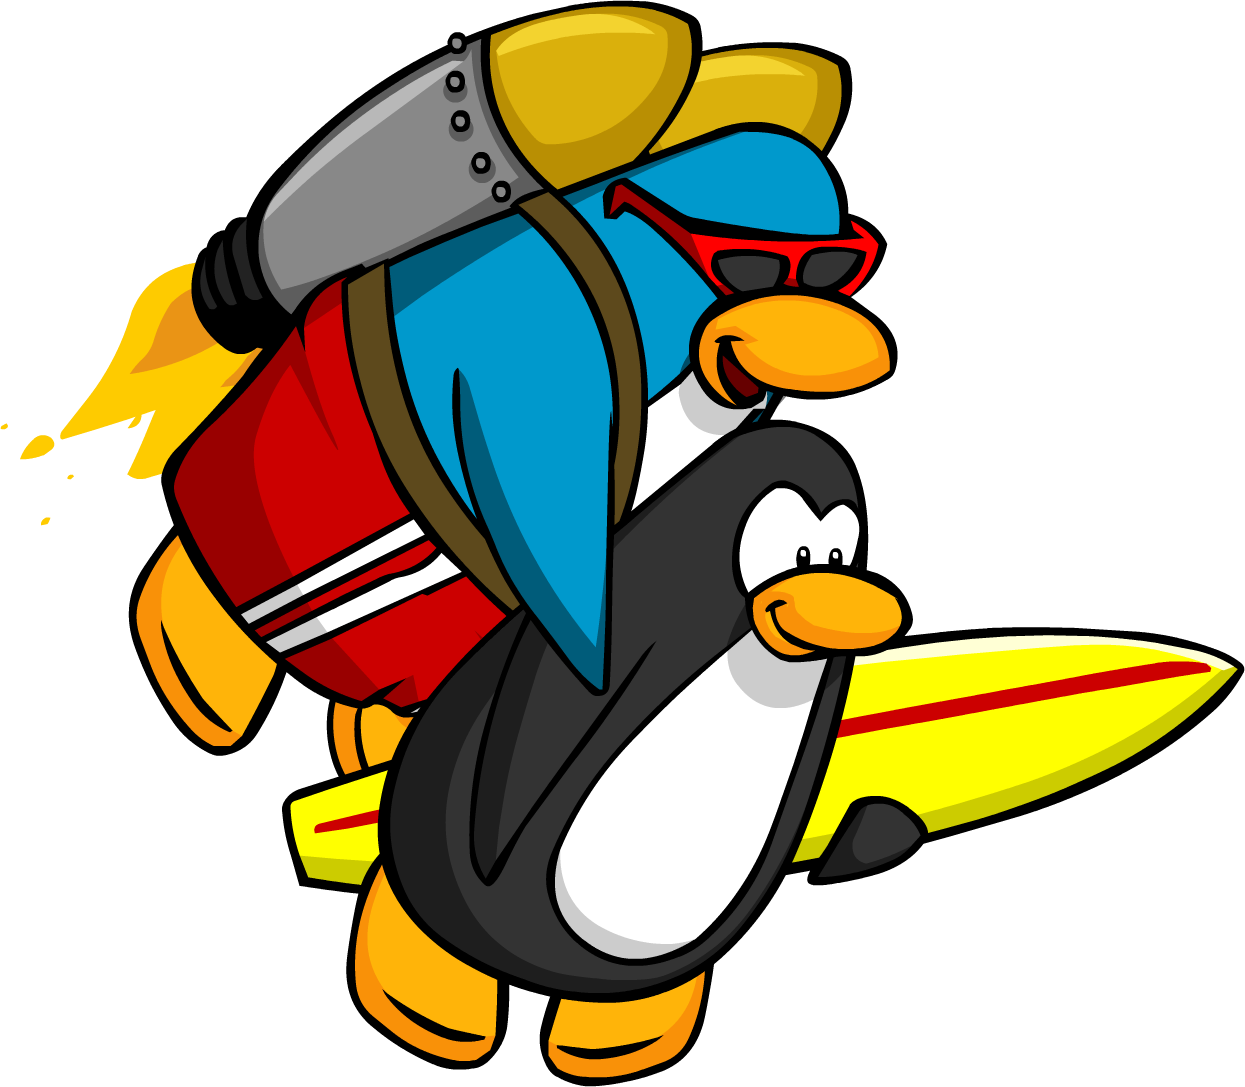 Catchin' Waves Jet Pack Surfer Carry - Club Penguin (1245x1087)